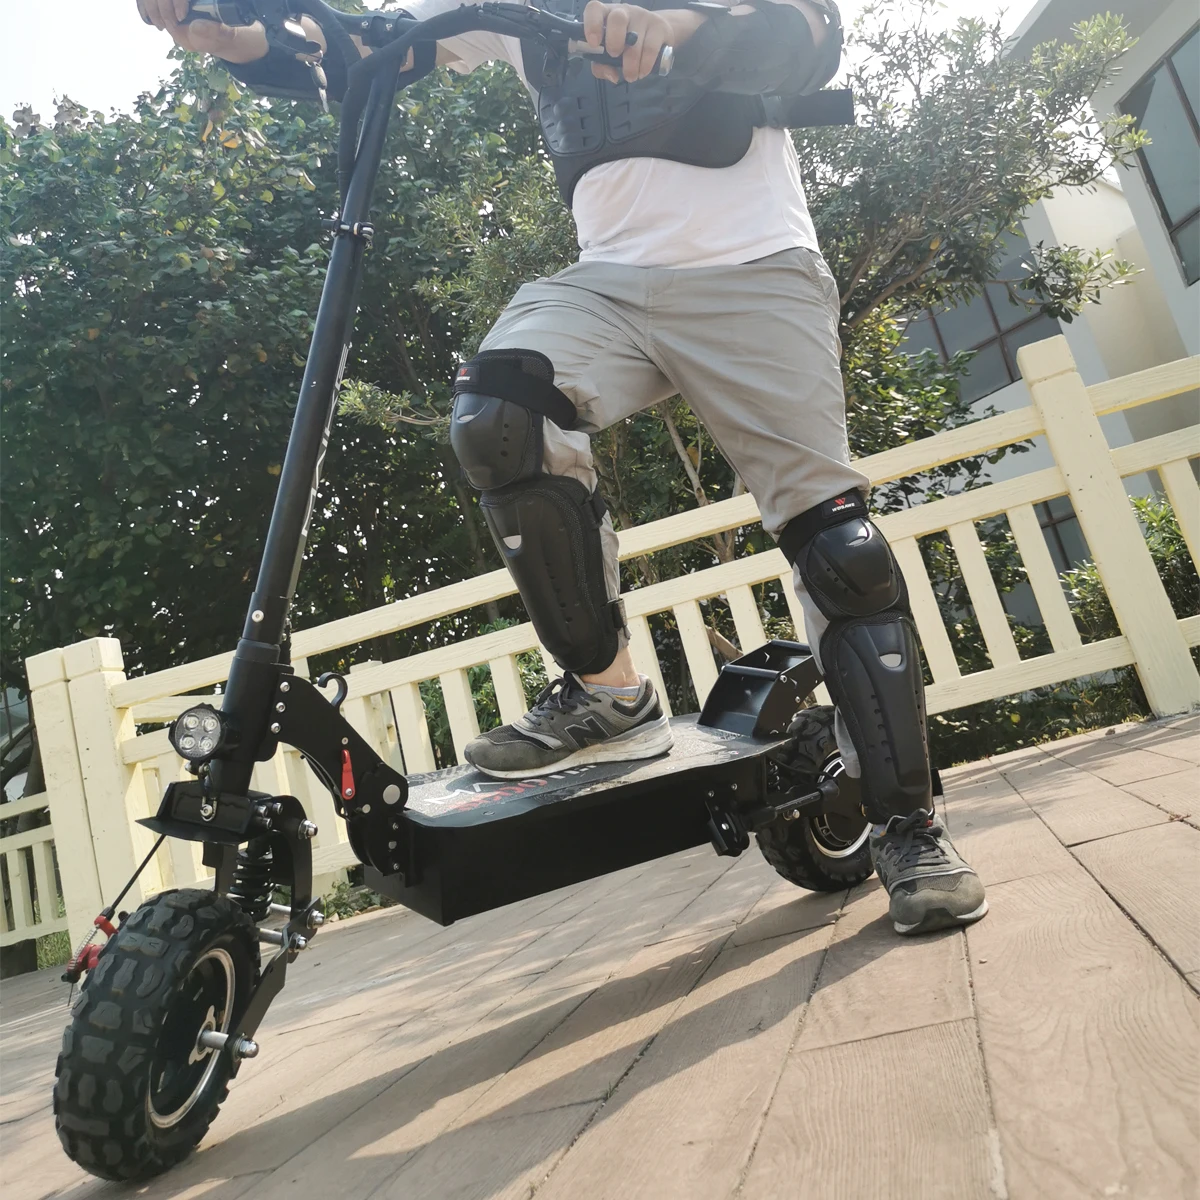 

Best Selling Quality maike mk4 oem electric scooter 1200w powerful scooter electric dual motor offroad e scooter